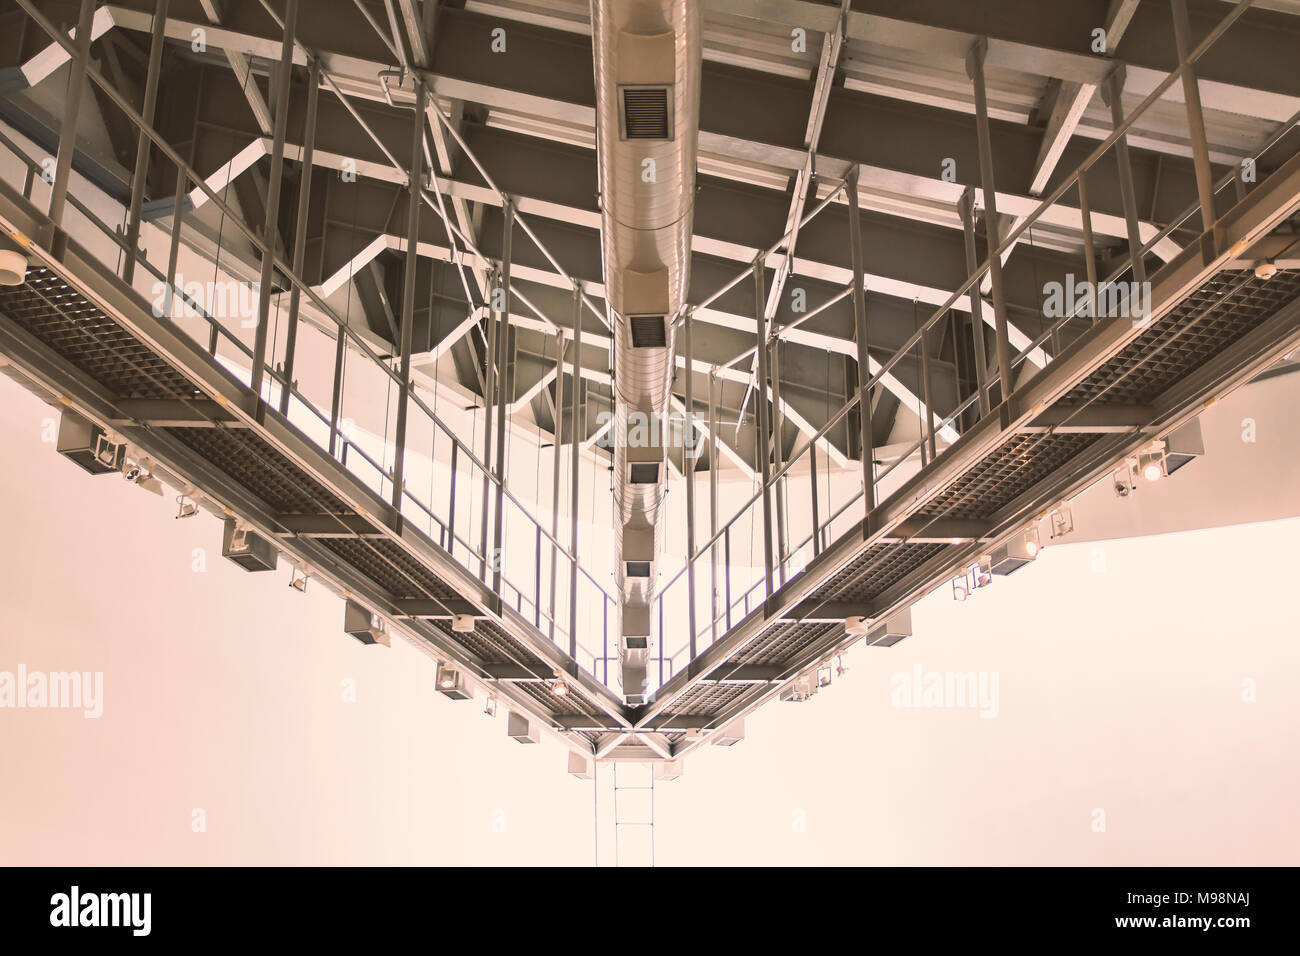 Abstract of air distribution system and lighting.Used color tool for vintage tone. Stock Photo